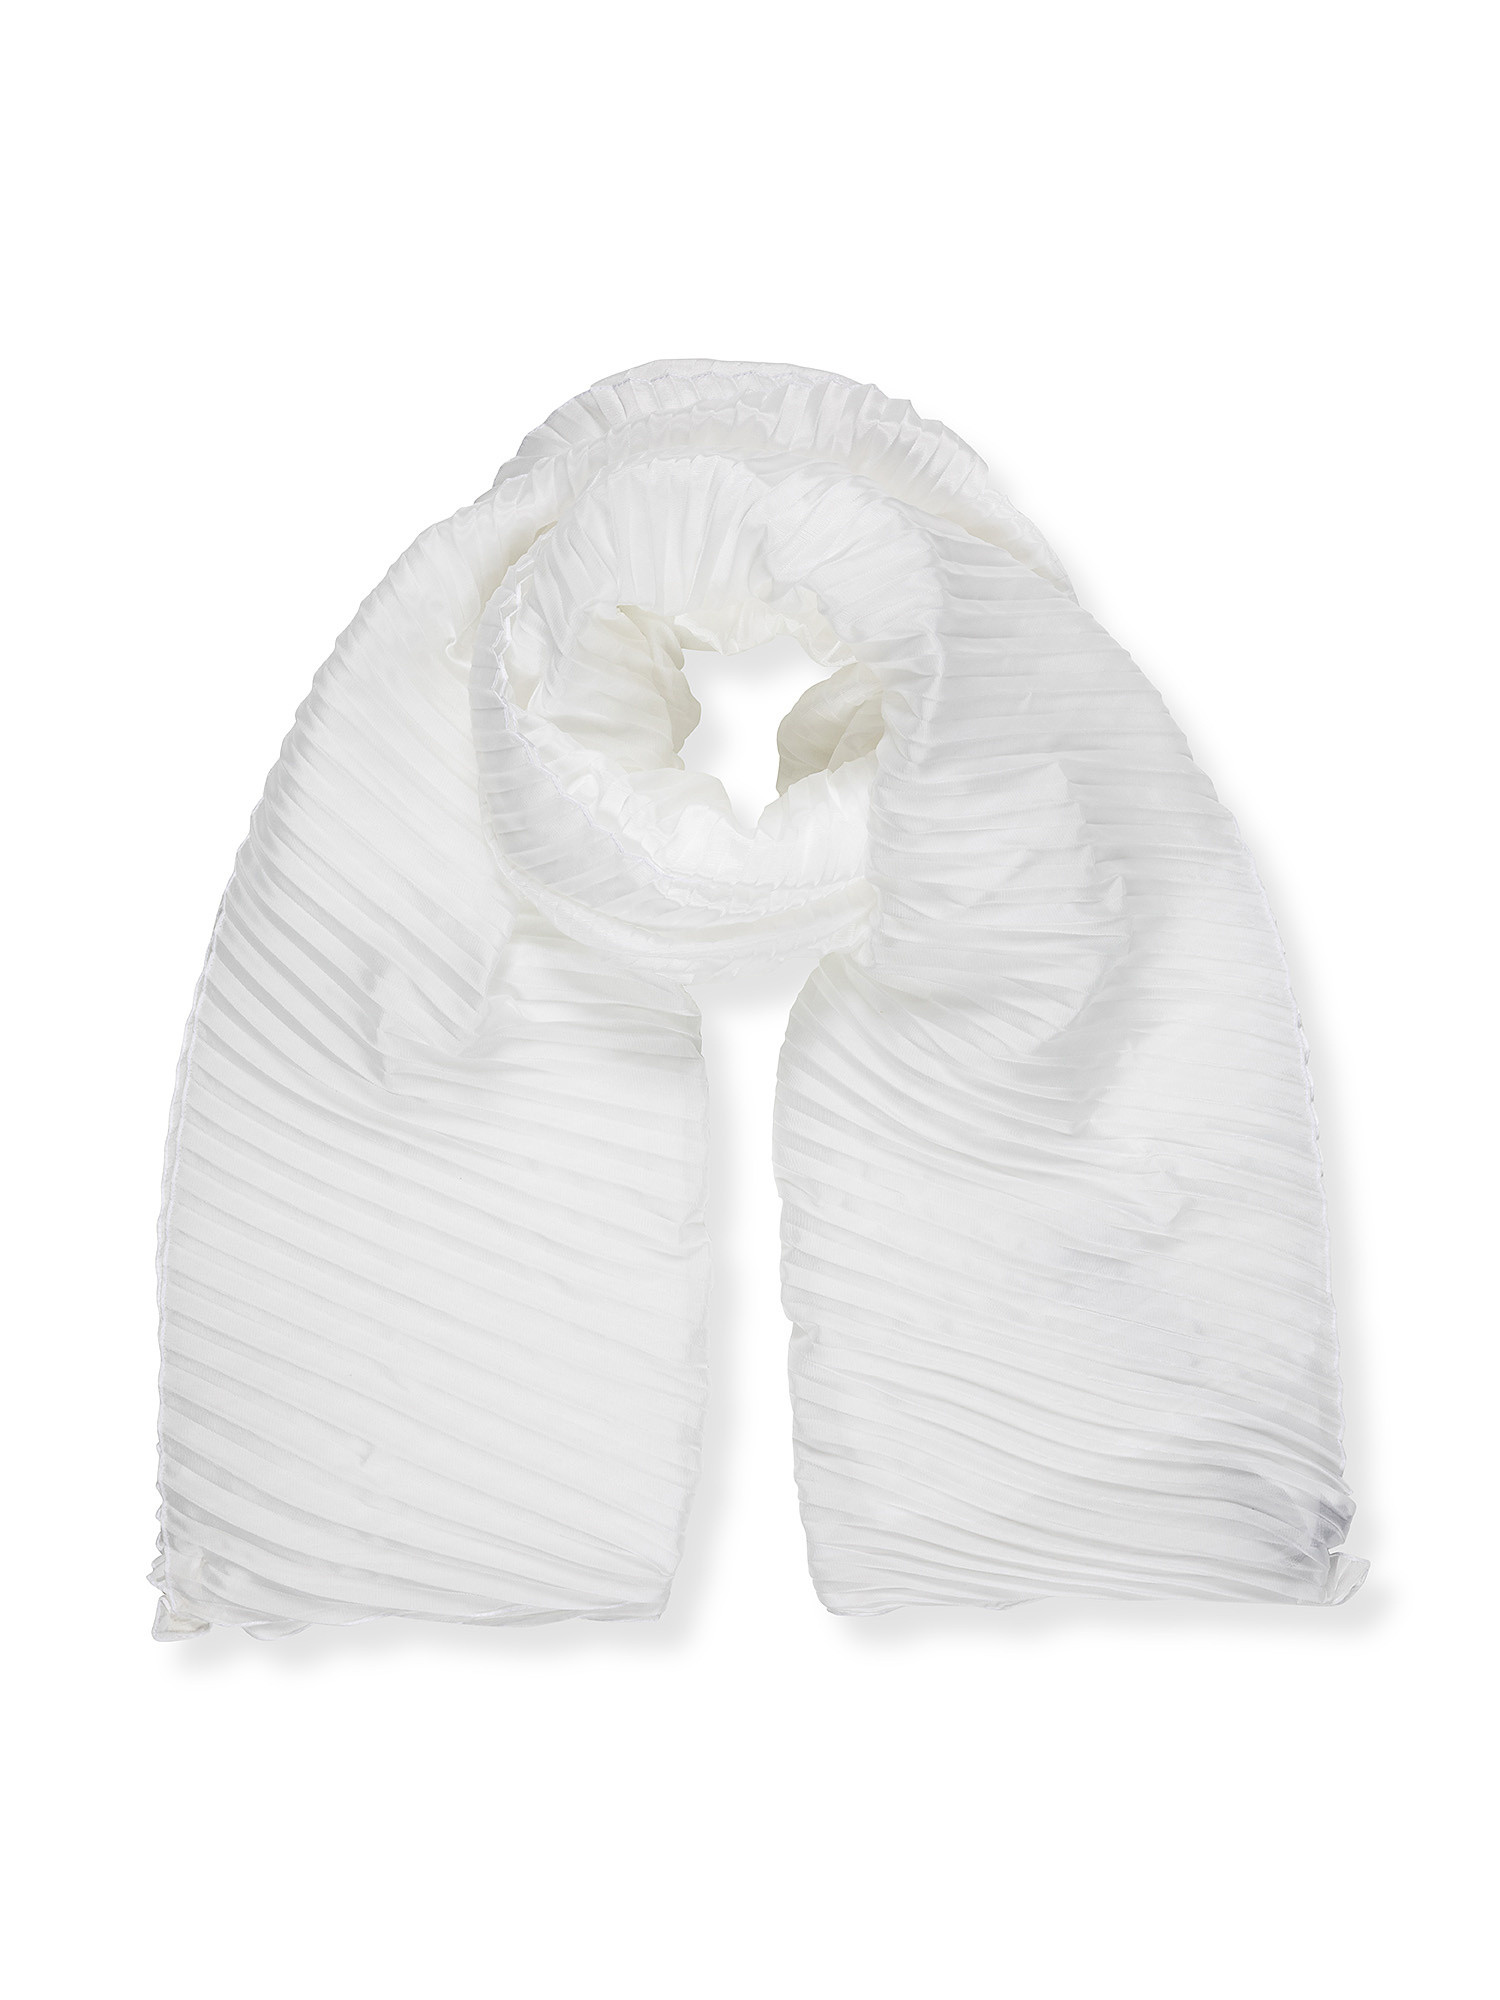 Emporio Armani - Lightweight pleated scarf, White, large image number 0